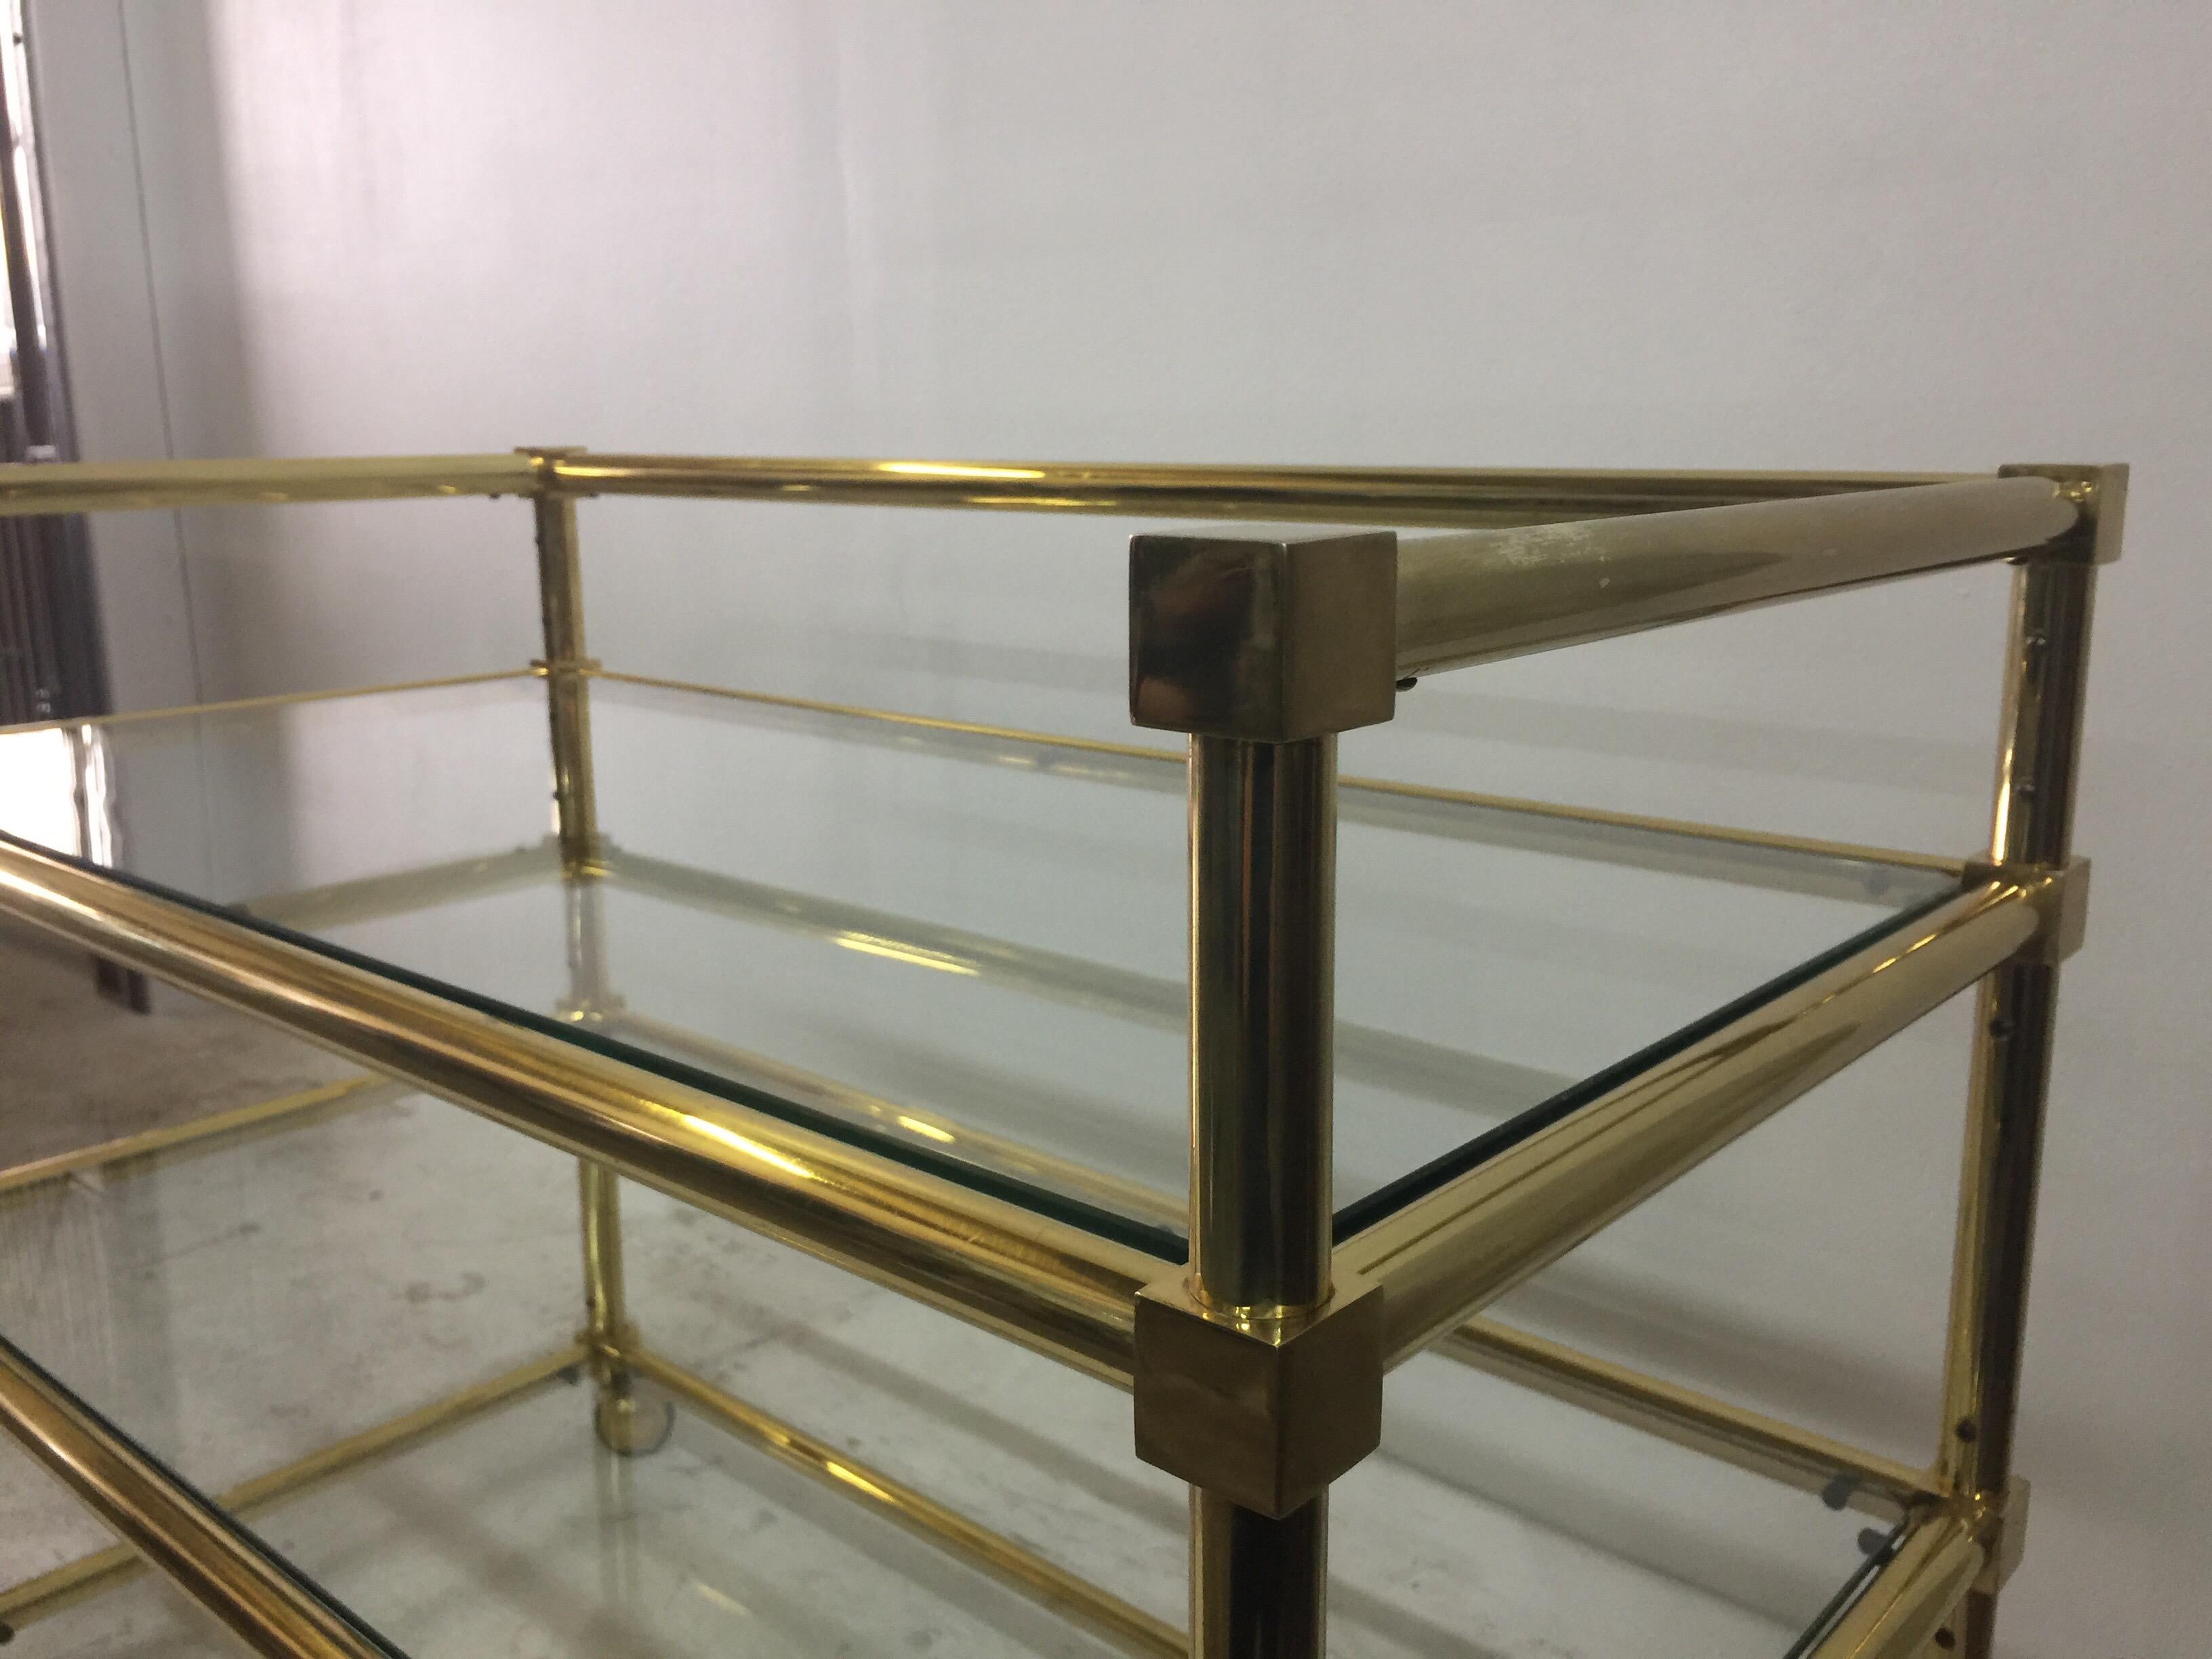 Attributed to Maison Jansen, this cart set on casters is perfectly proportioned and all vintage with heavily constructed tubular brass and square accent joints. Will play an important role in your bar décor needs. Three glass shelves and back